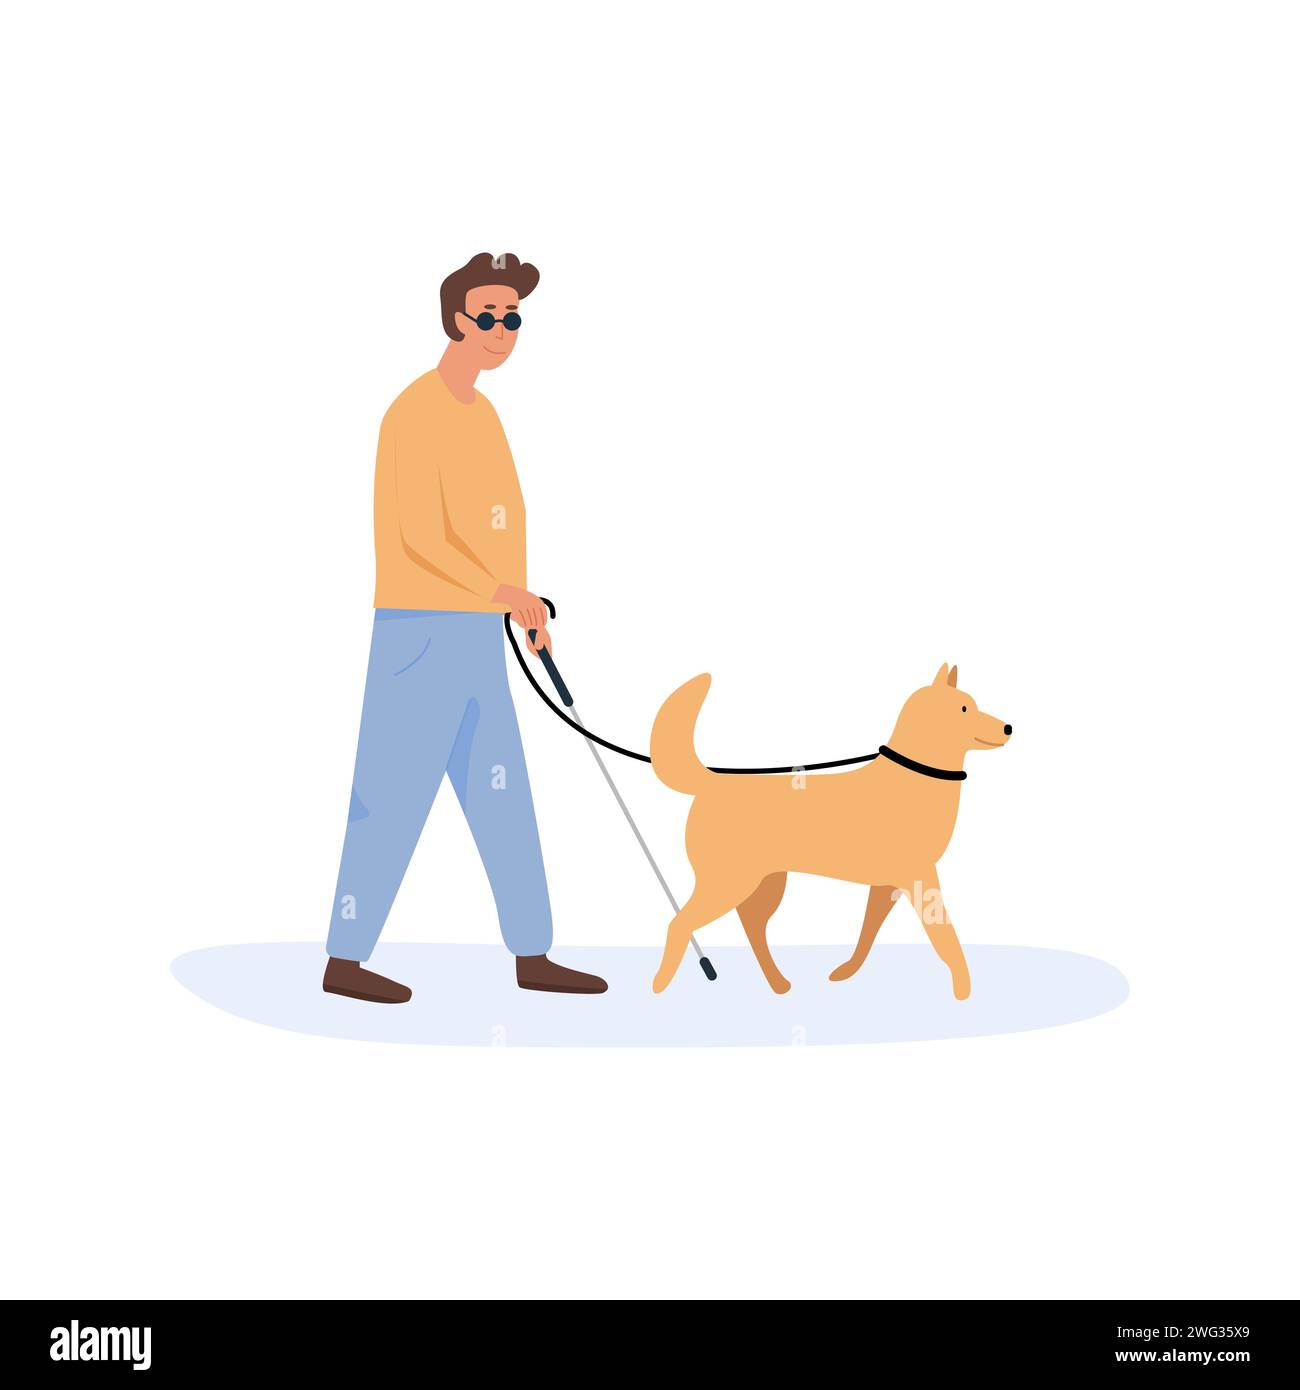 A guide dog with blind person walking together. Disabled male with cane stick using help of dog. Flat style characters. Vector illustration Stock Vector